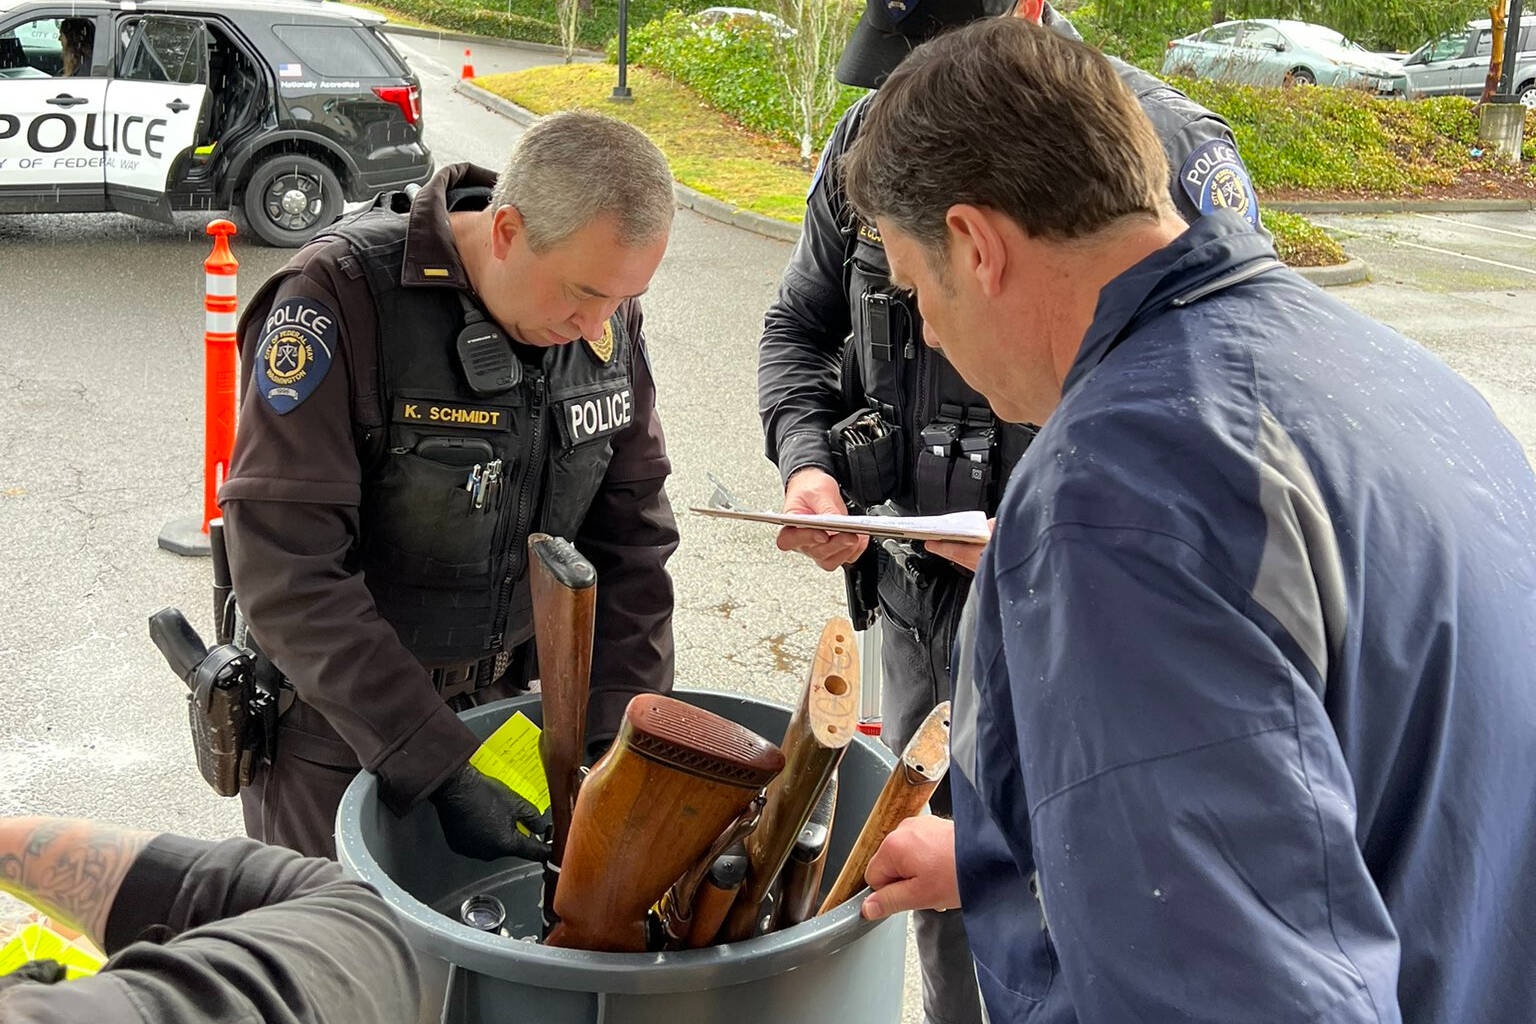 This photo, shared by Federal Way Mayor Jim Ferrell on Twitter, shows officers working at the Feb. 4 gun buy-back event in Federal Way.